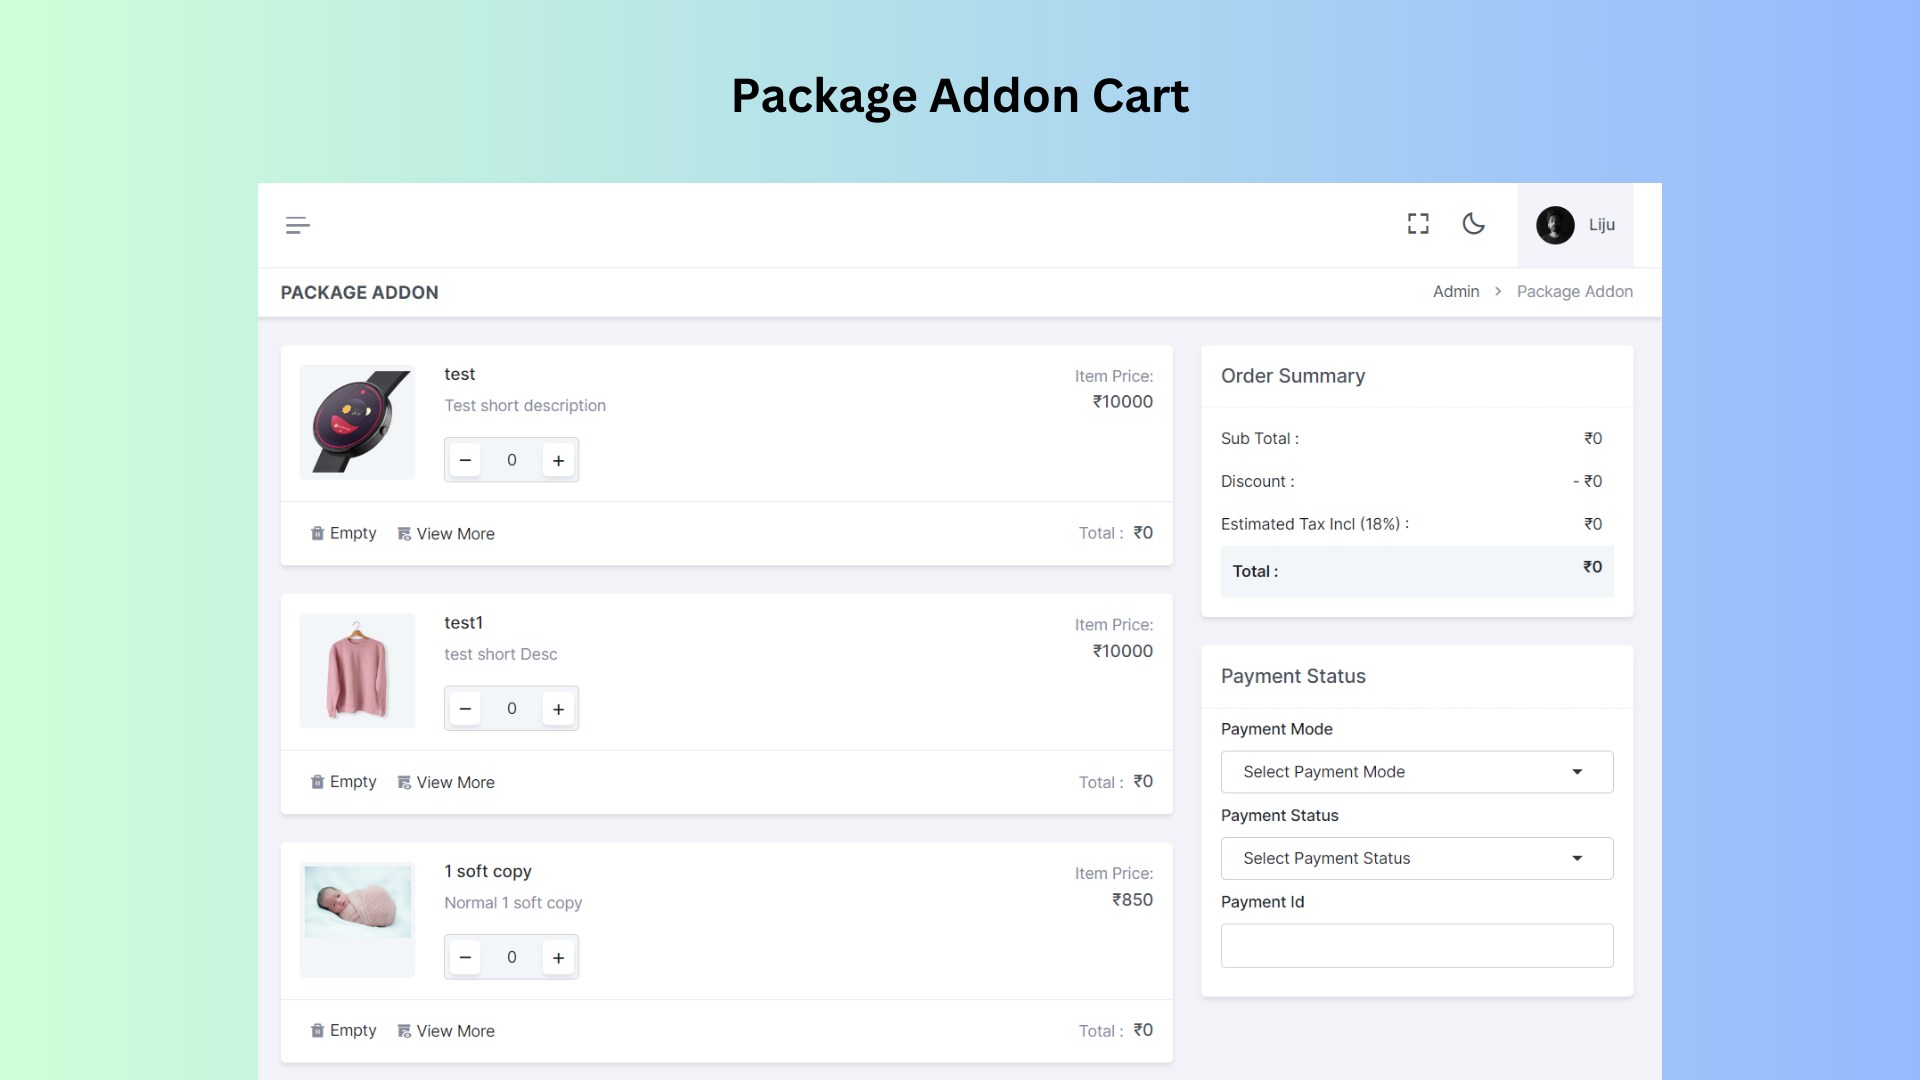 Exclusive cart feature, similar to ecommerce platforms, that provides users with flexibility to create package add-on orders.